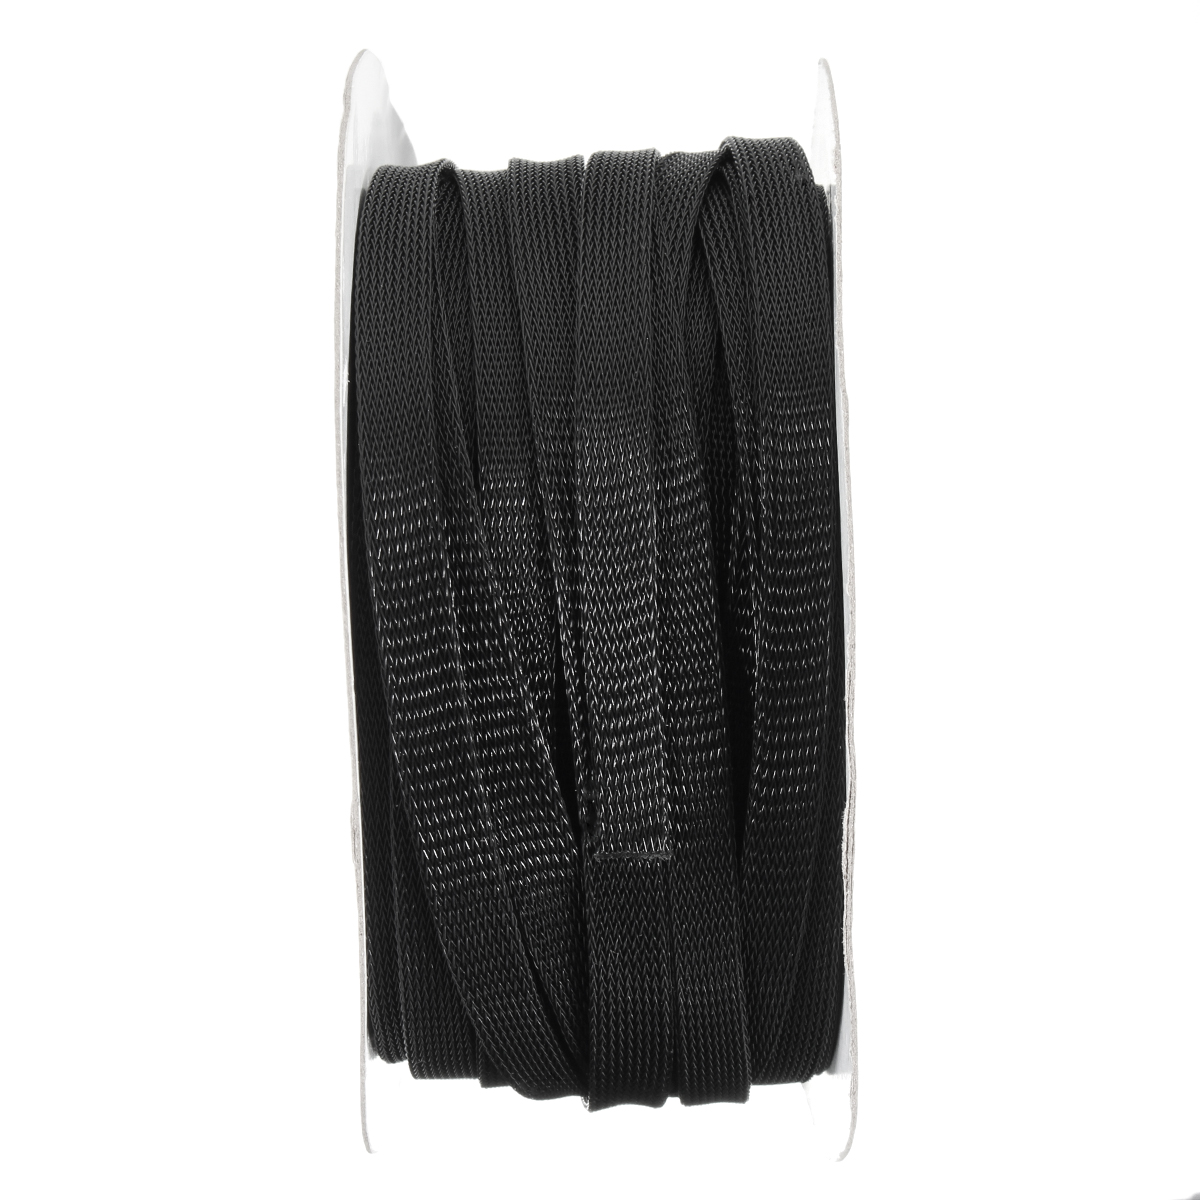 30m-8mm10mm12mm15mm20mm-Expandable-Wire-Cable-Sleeving-Braided-Tubing-Black-1179626-3